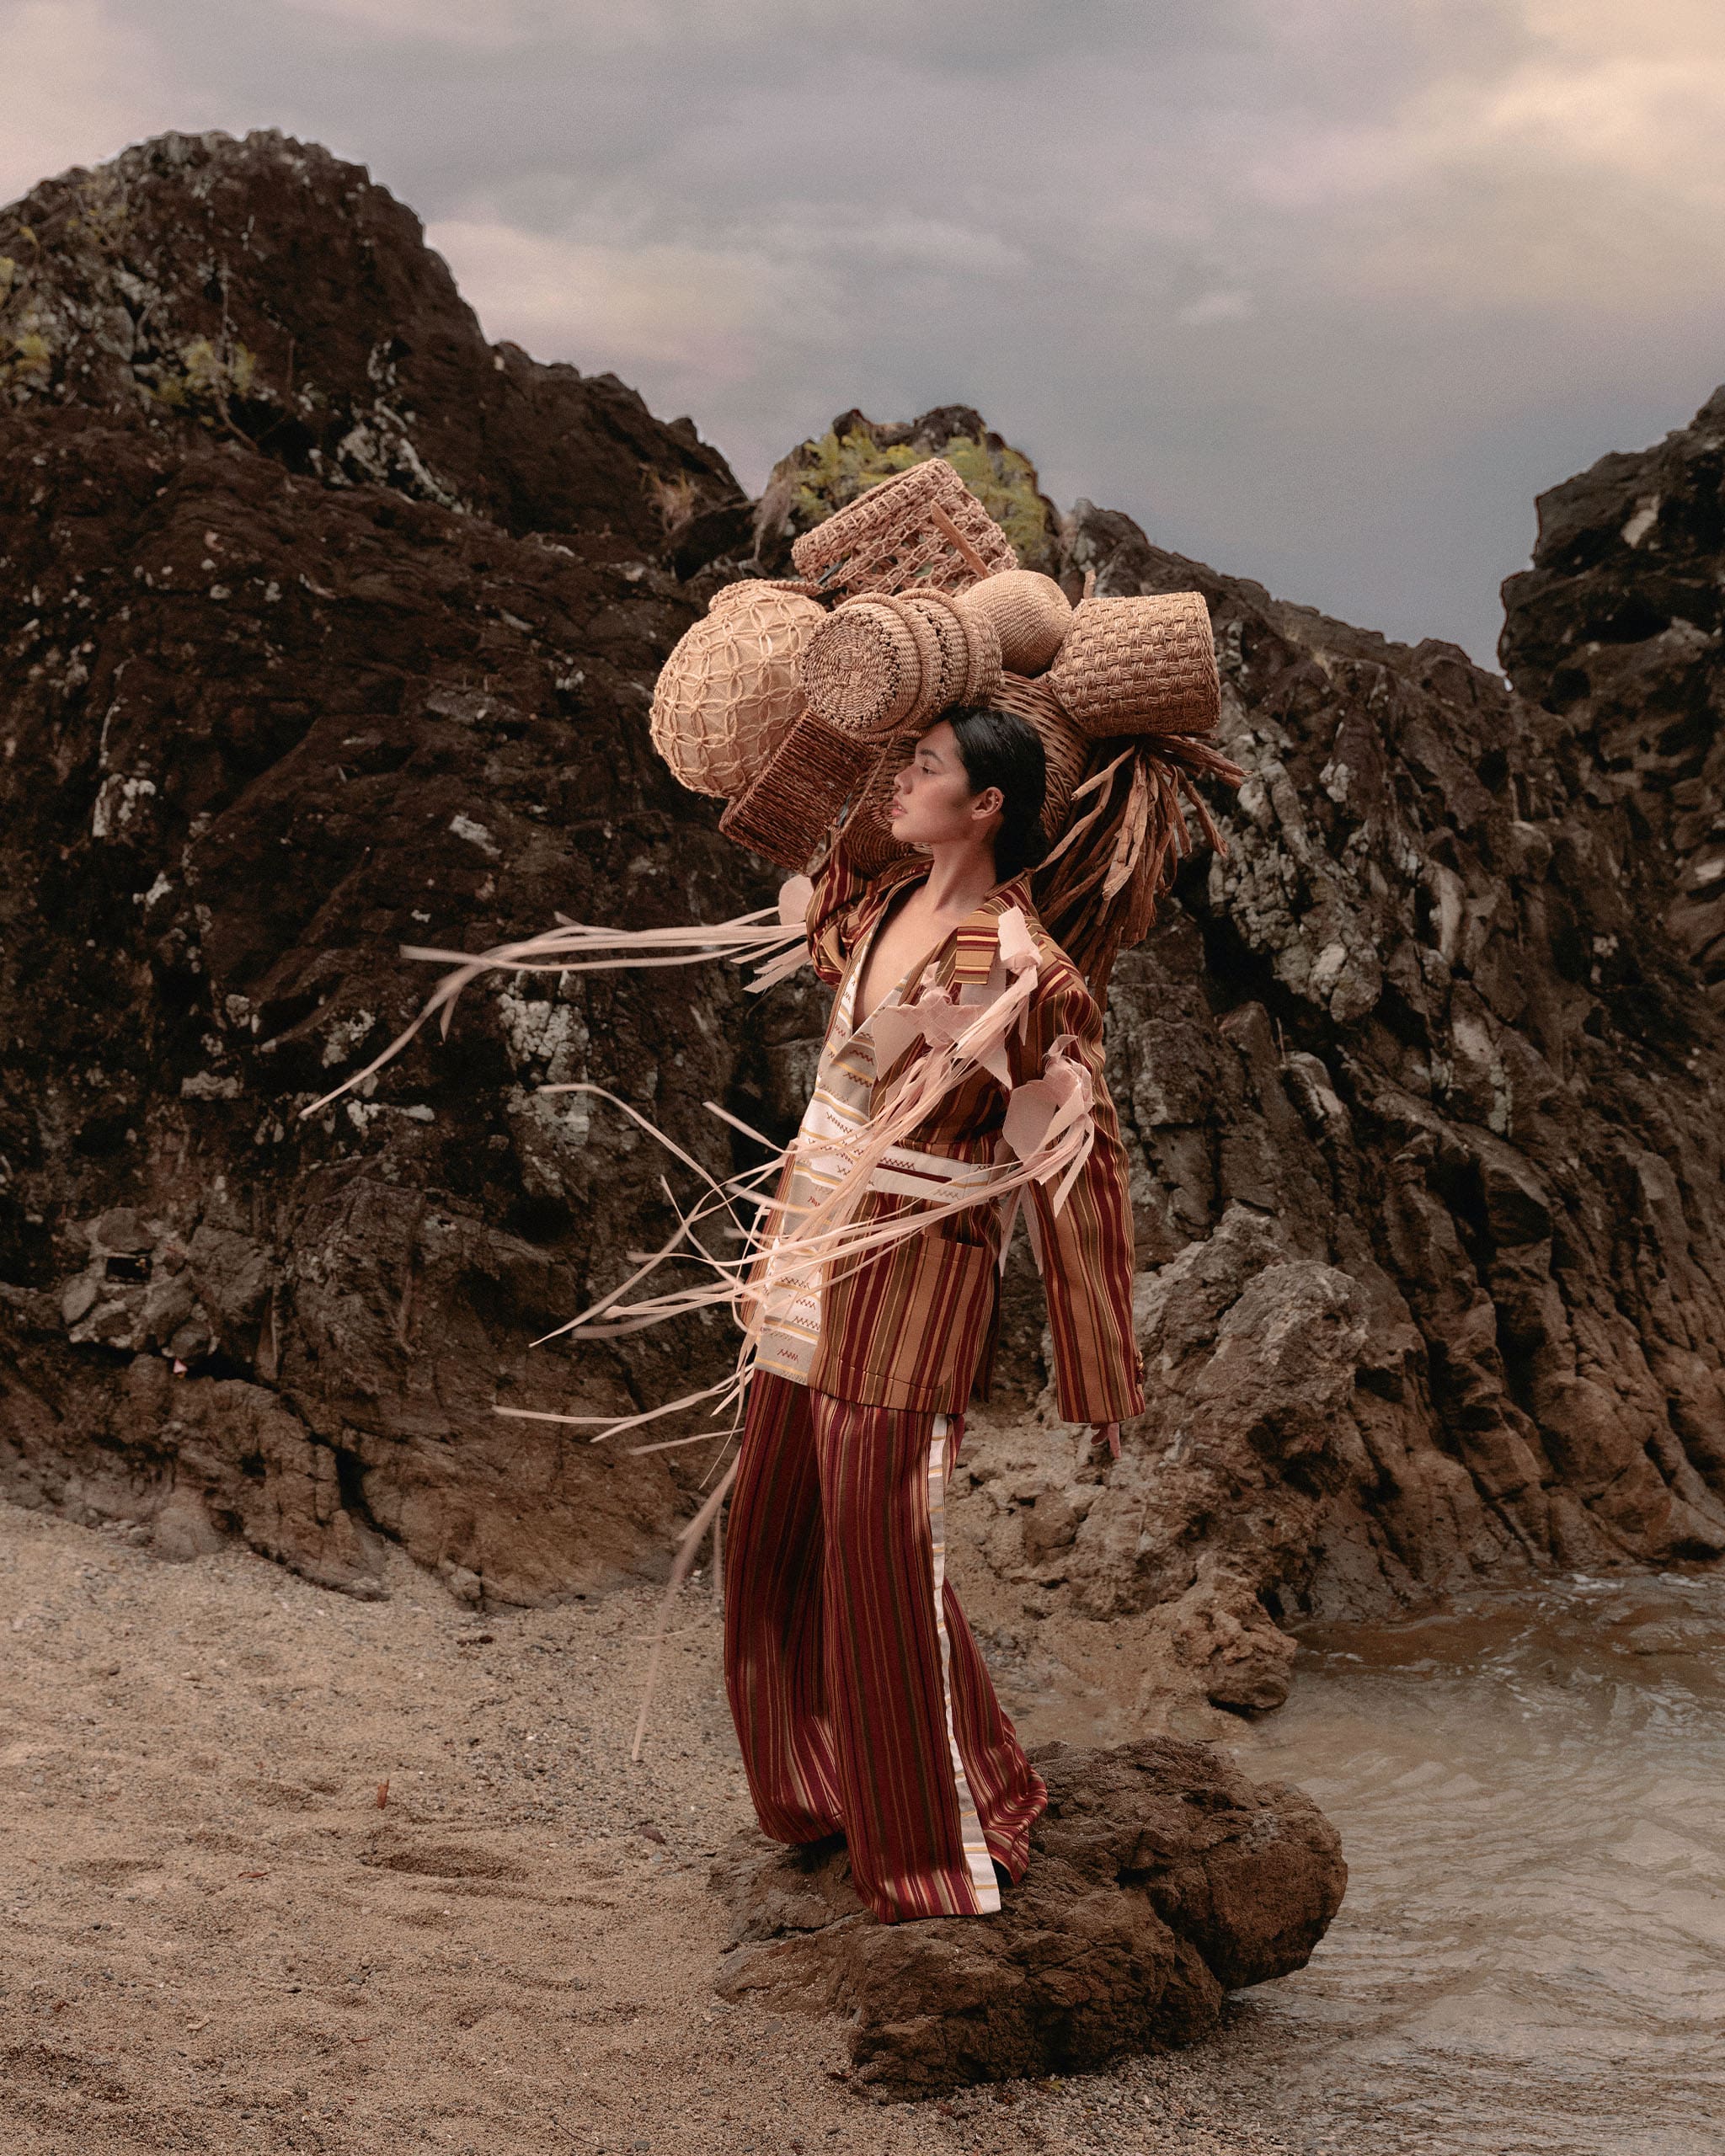 Filipina woman wearing a Jaggy Glarino Suit at the beach carrying Batangas woven bags and baskets